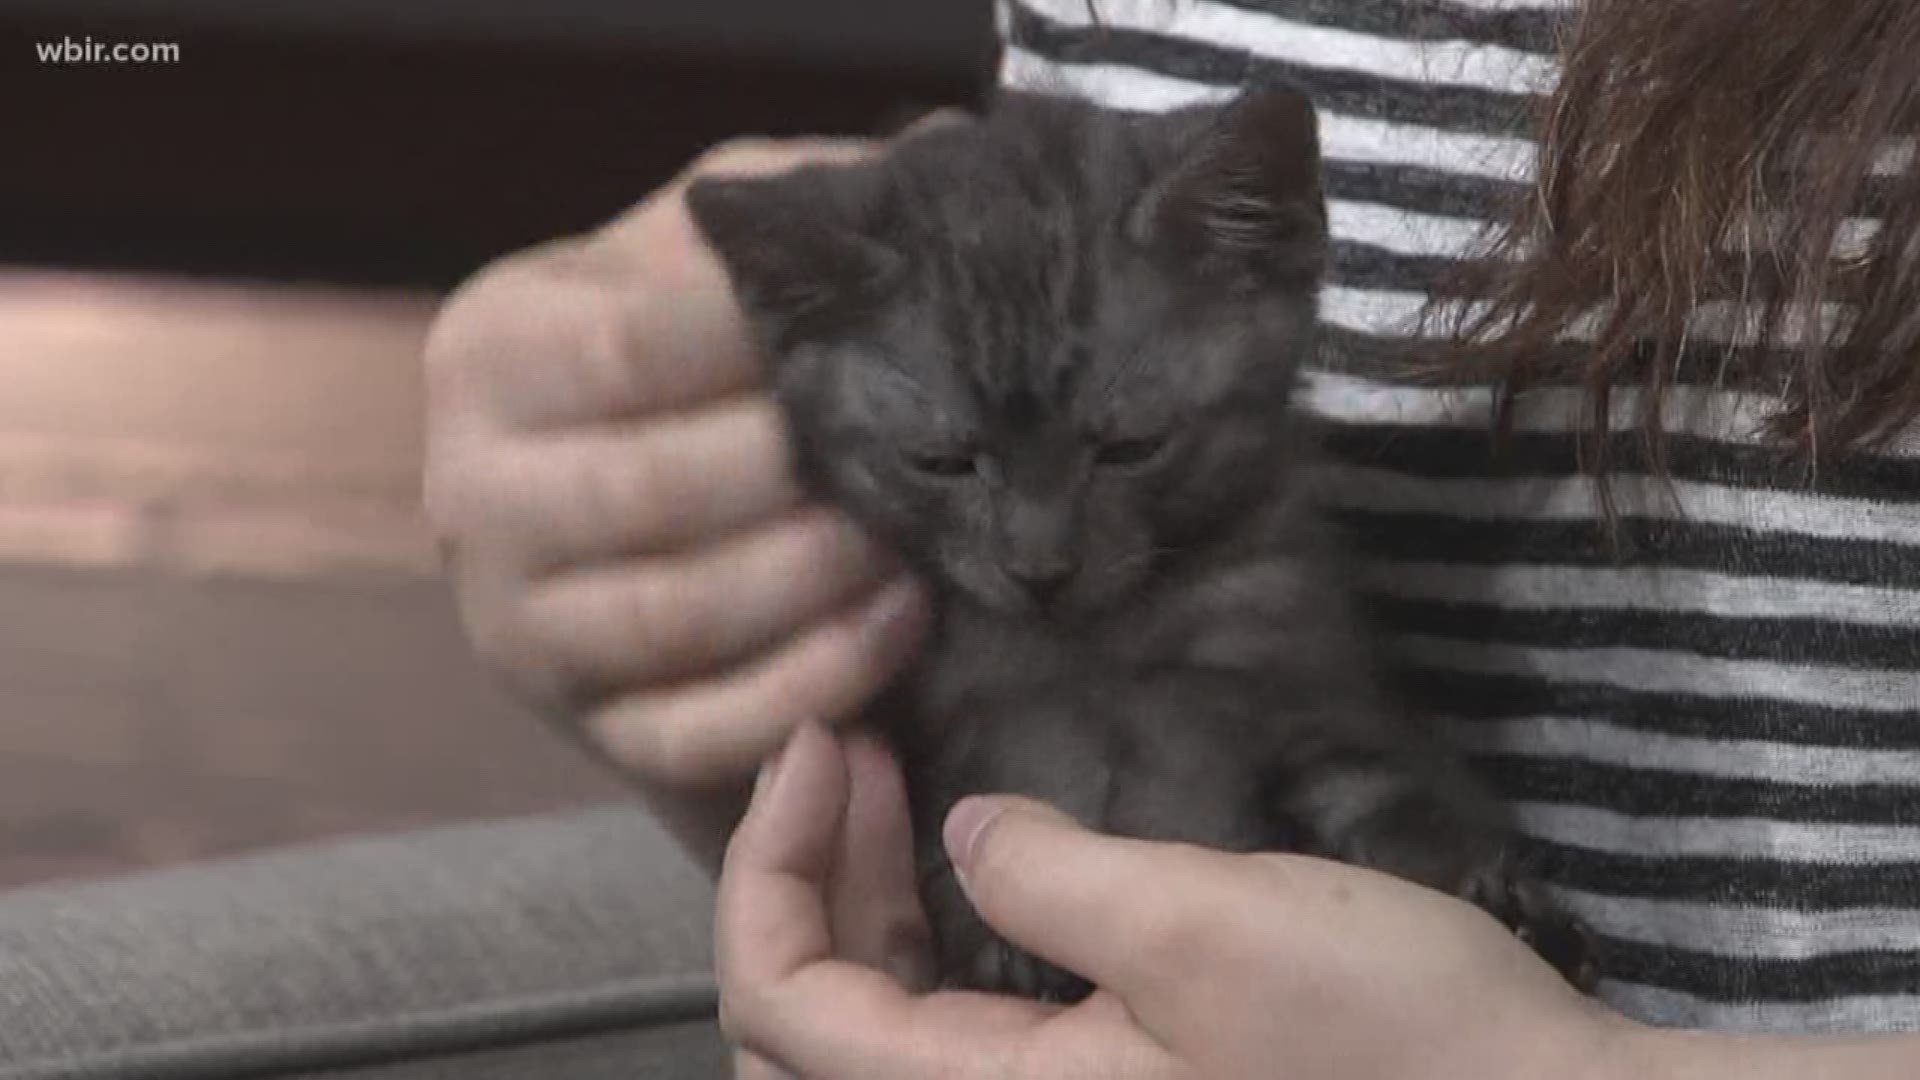 Thor the kitten is up for adoption at Young-Williams Animal Center.